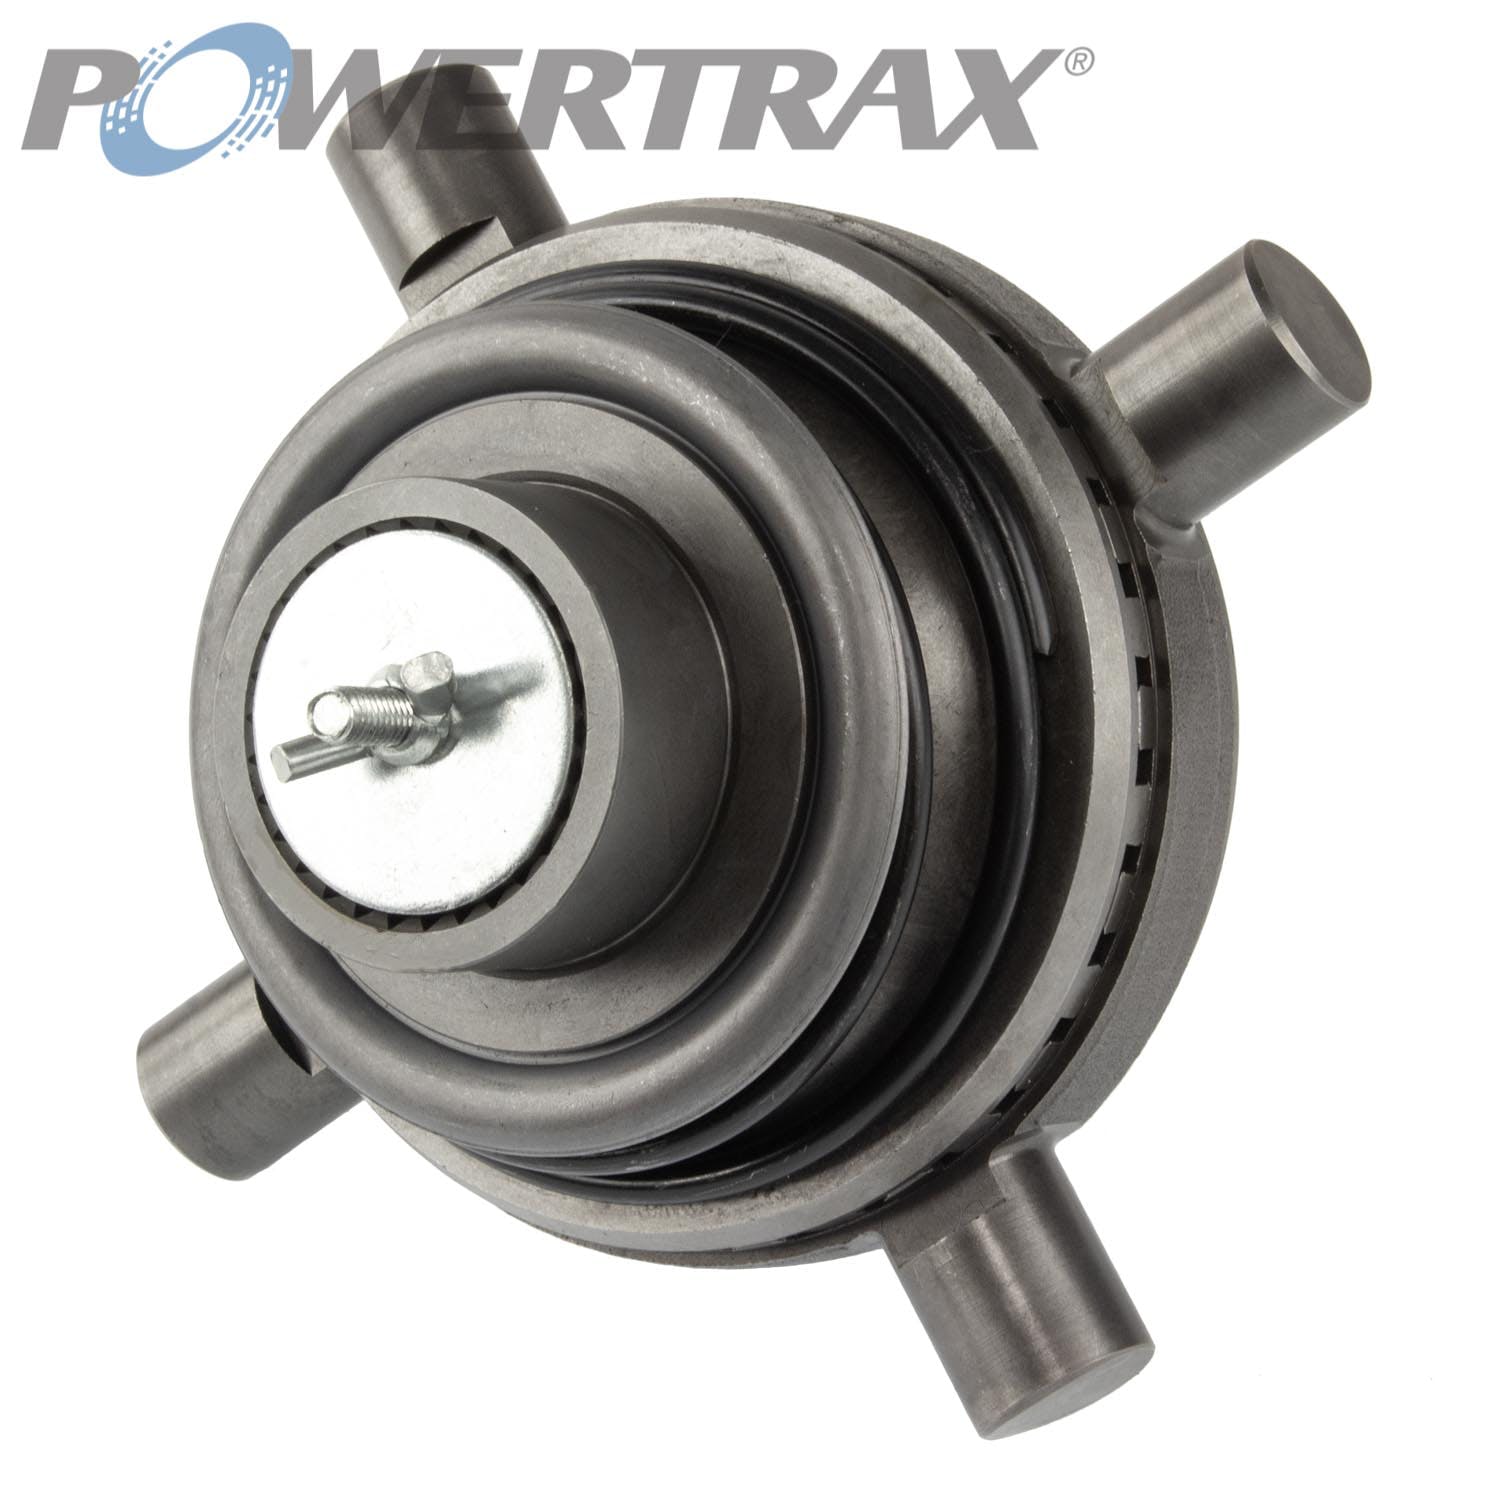 PowerTrax LK2A1430 Differential Lock Assembly